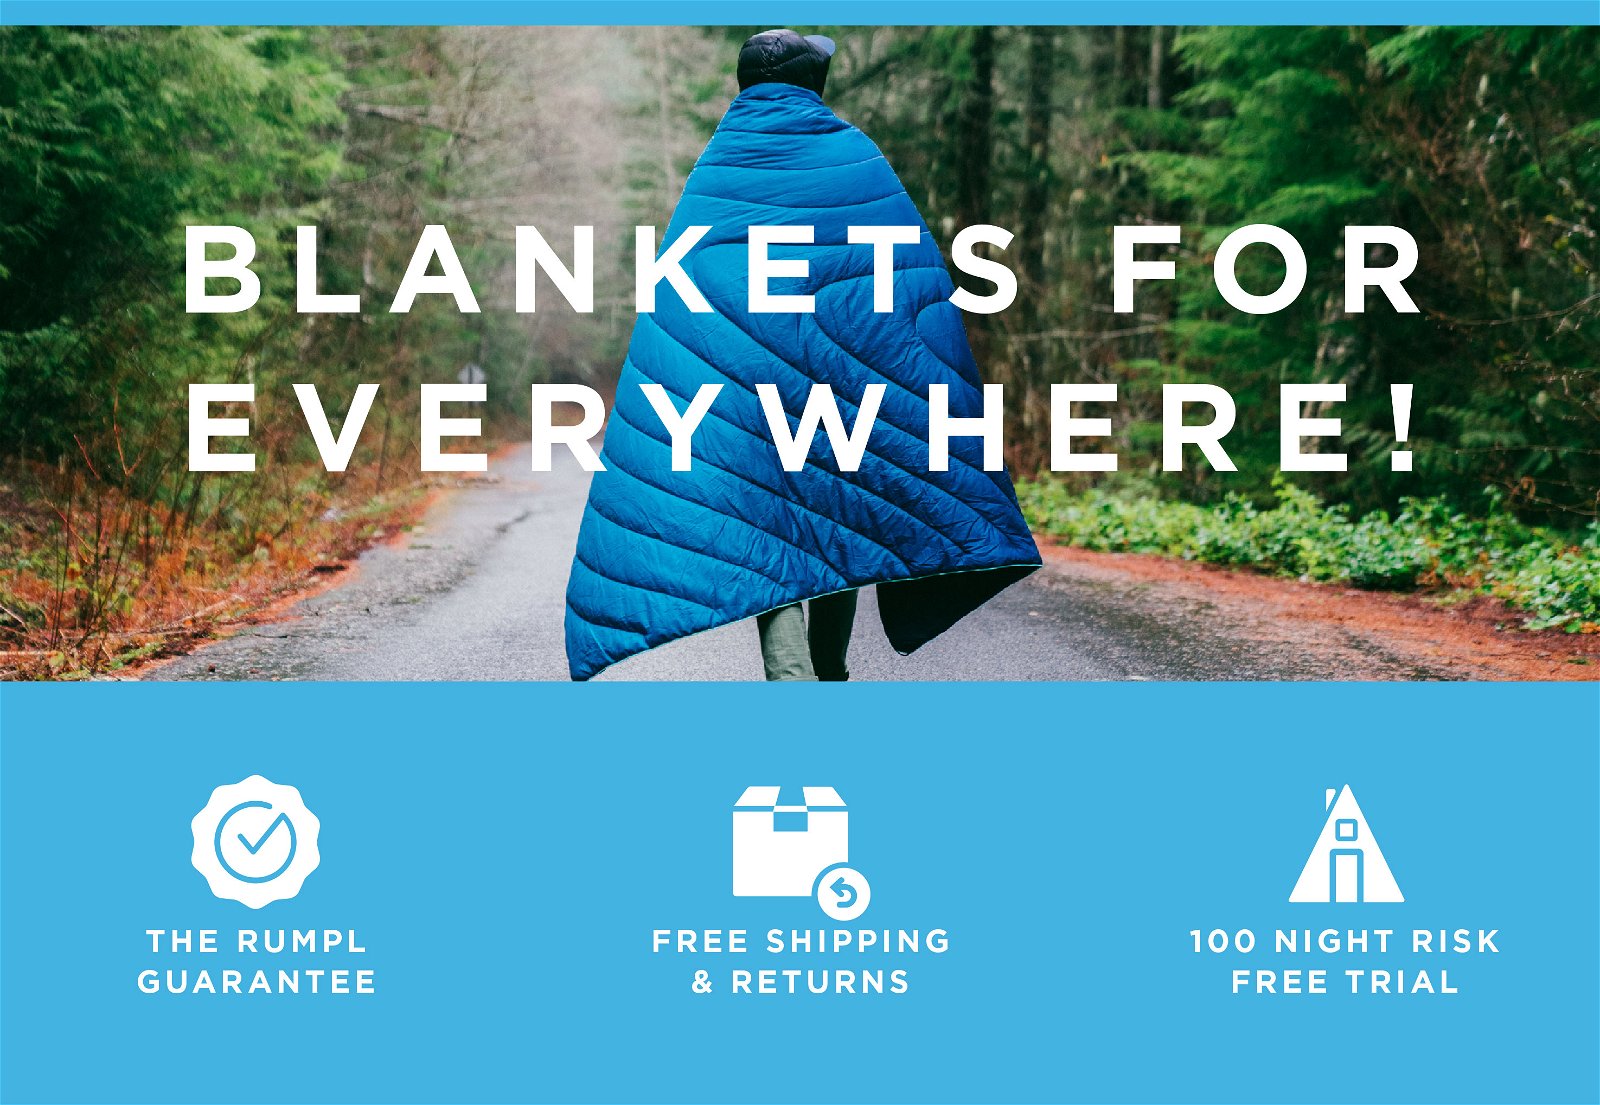 Blankets For Everywhere! Rumpl Gaurantee. Free Shipping & Returns. 100 night risk free trial.